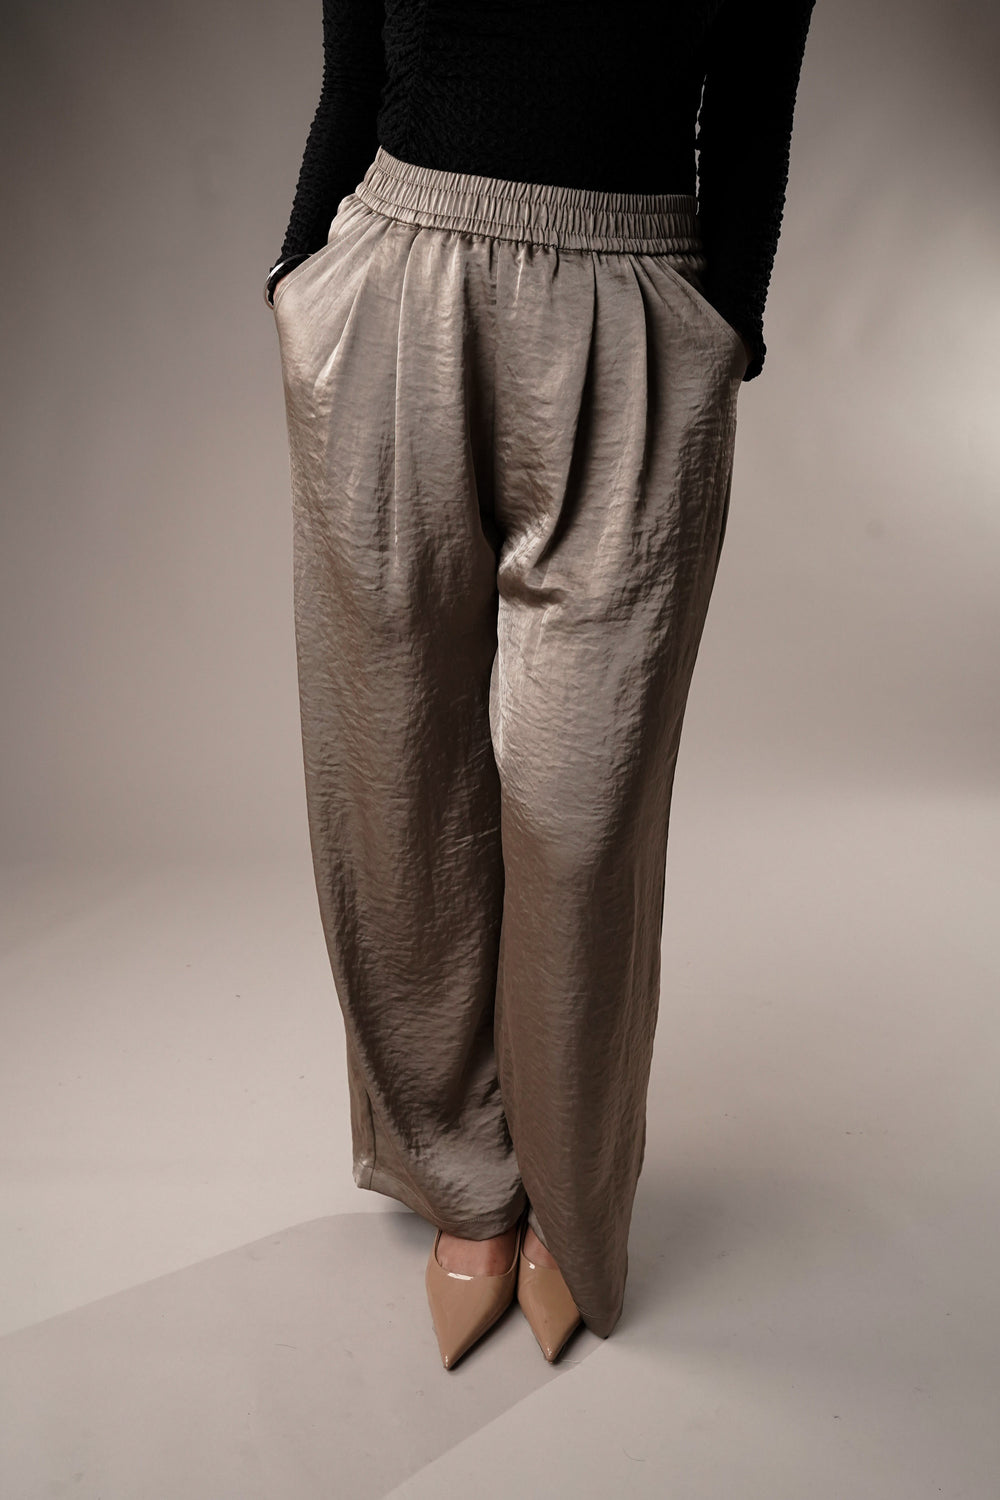 Wide leg satin pants for stylish formal events